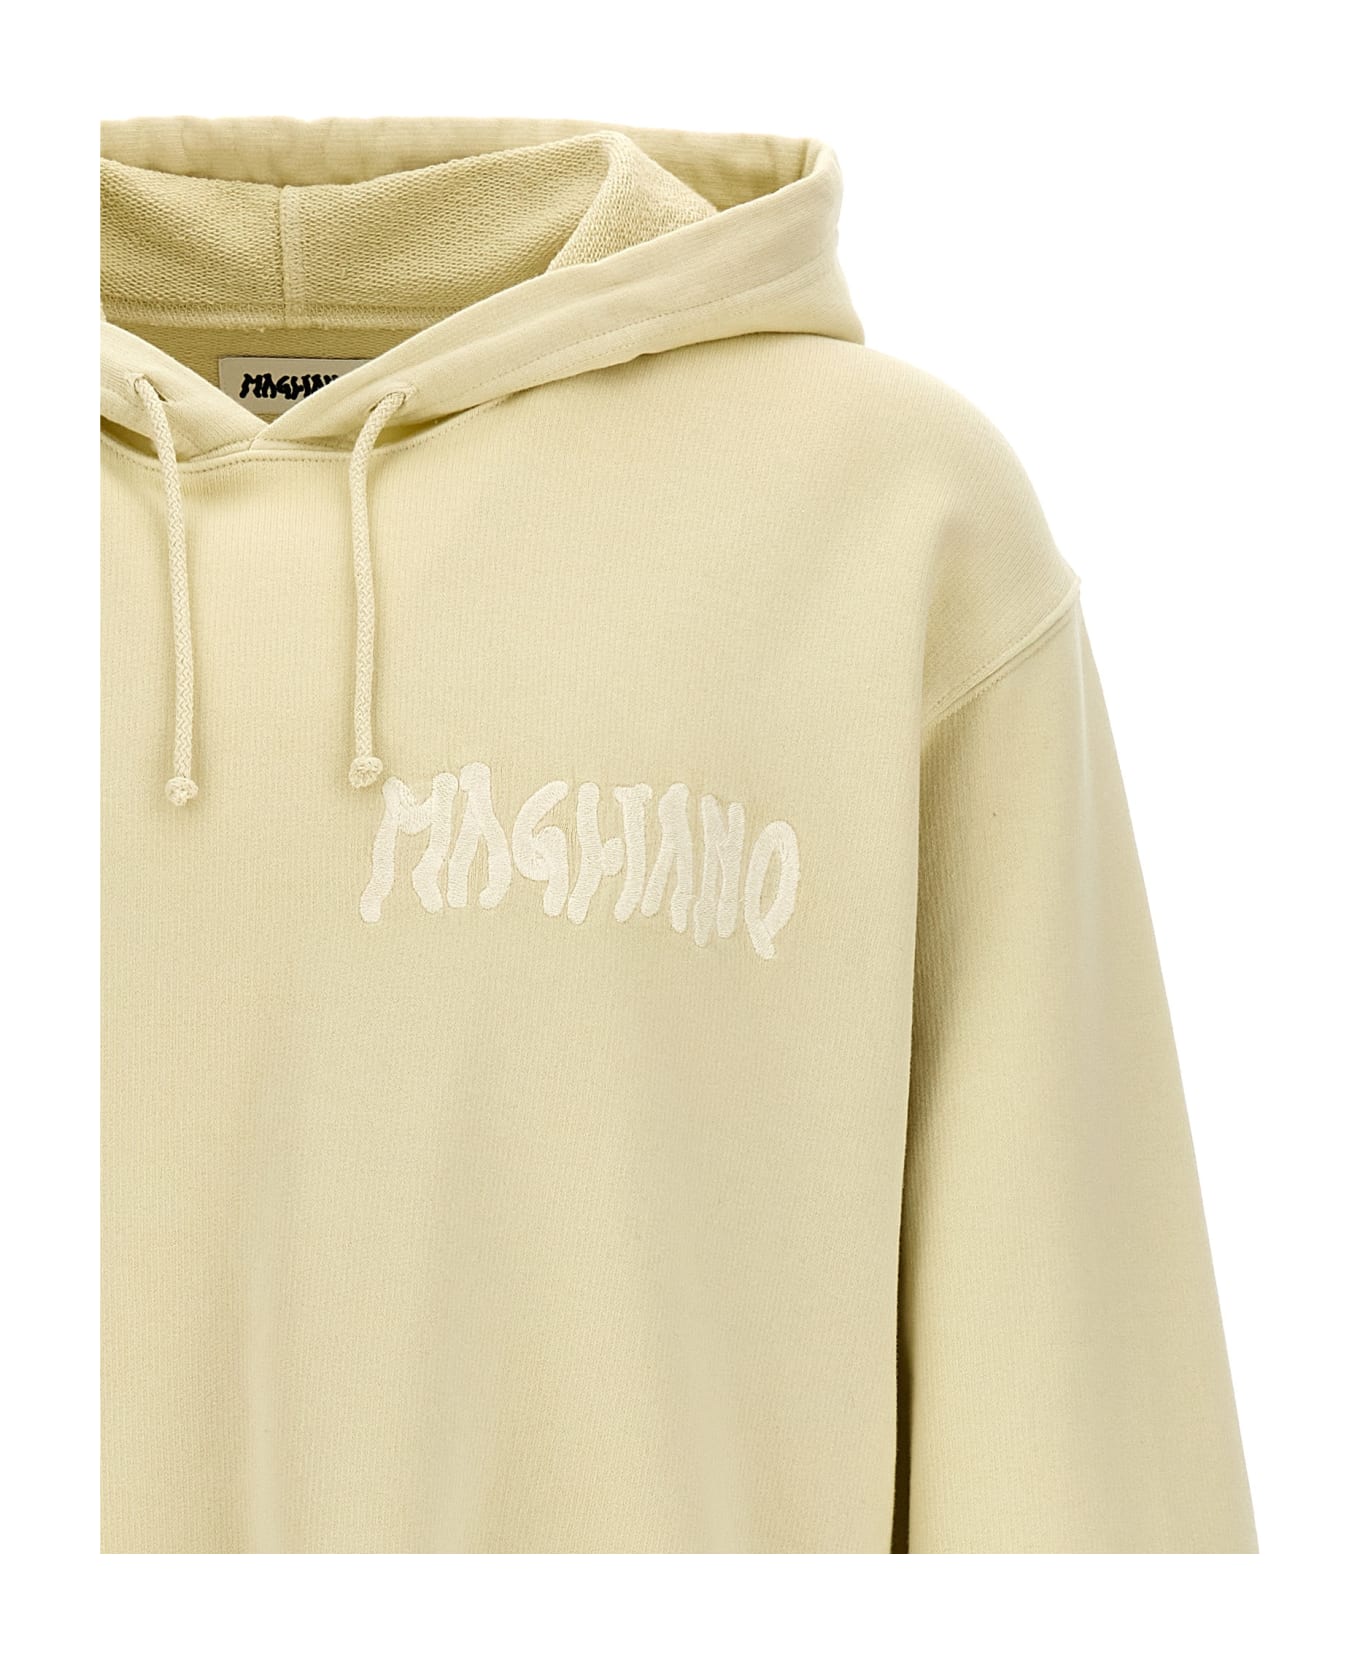 Magliano 'twisted' Hoodie - White